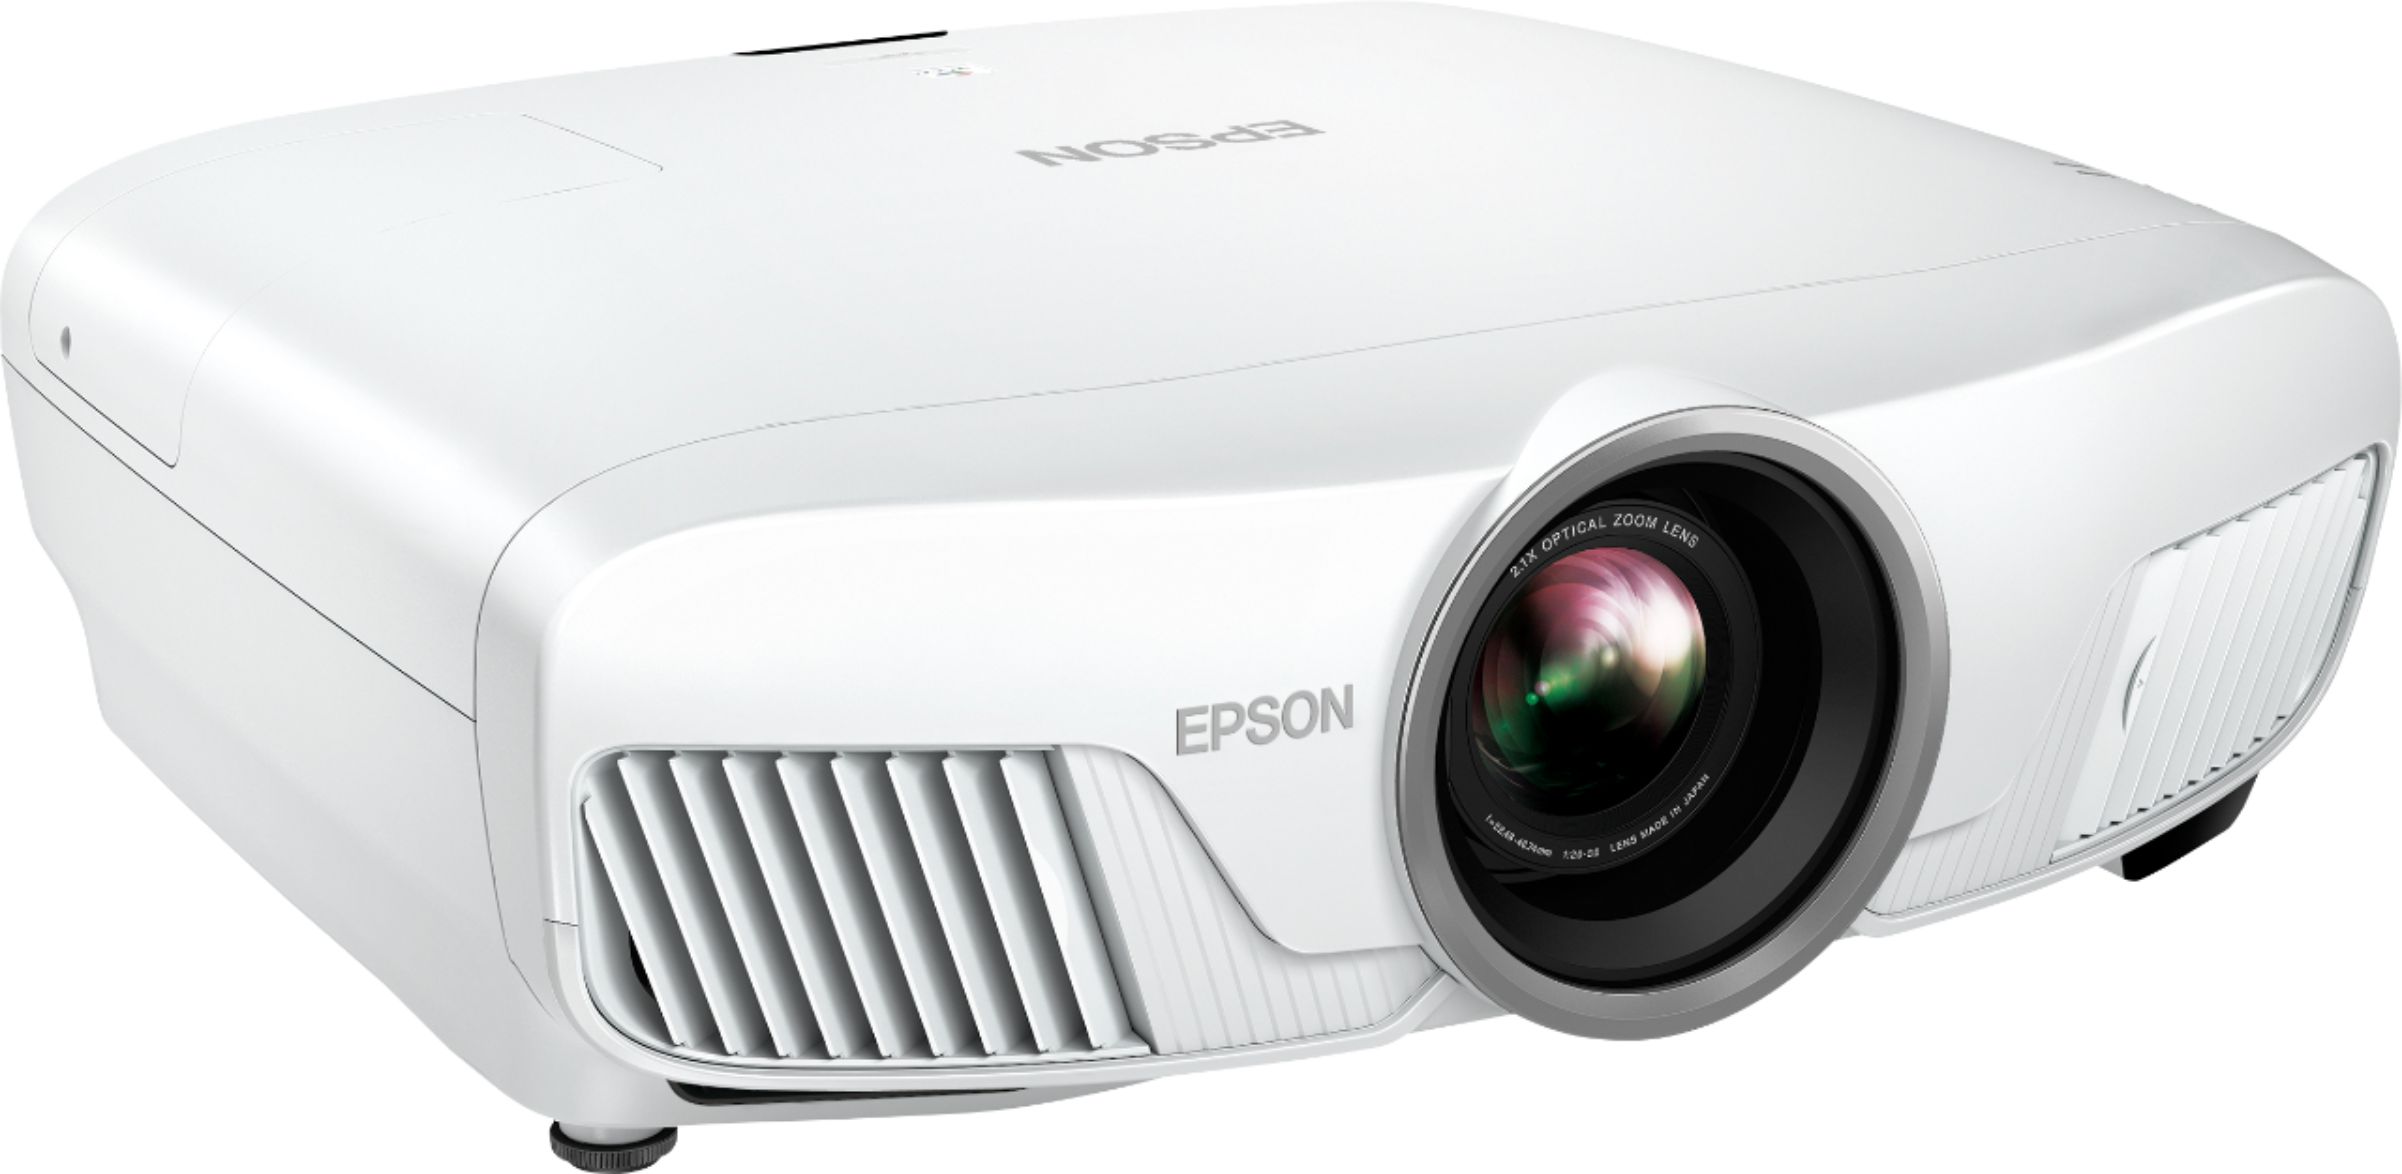 Angle View: Epson - Home Cinema 4010 4K 3LCD Projector with High Dynamic Range - Certified Refurbished - White